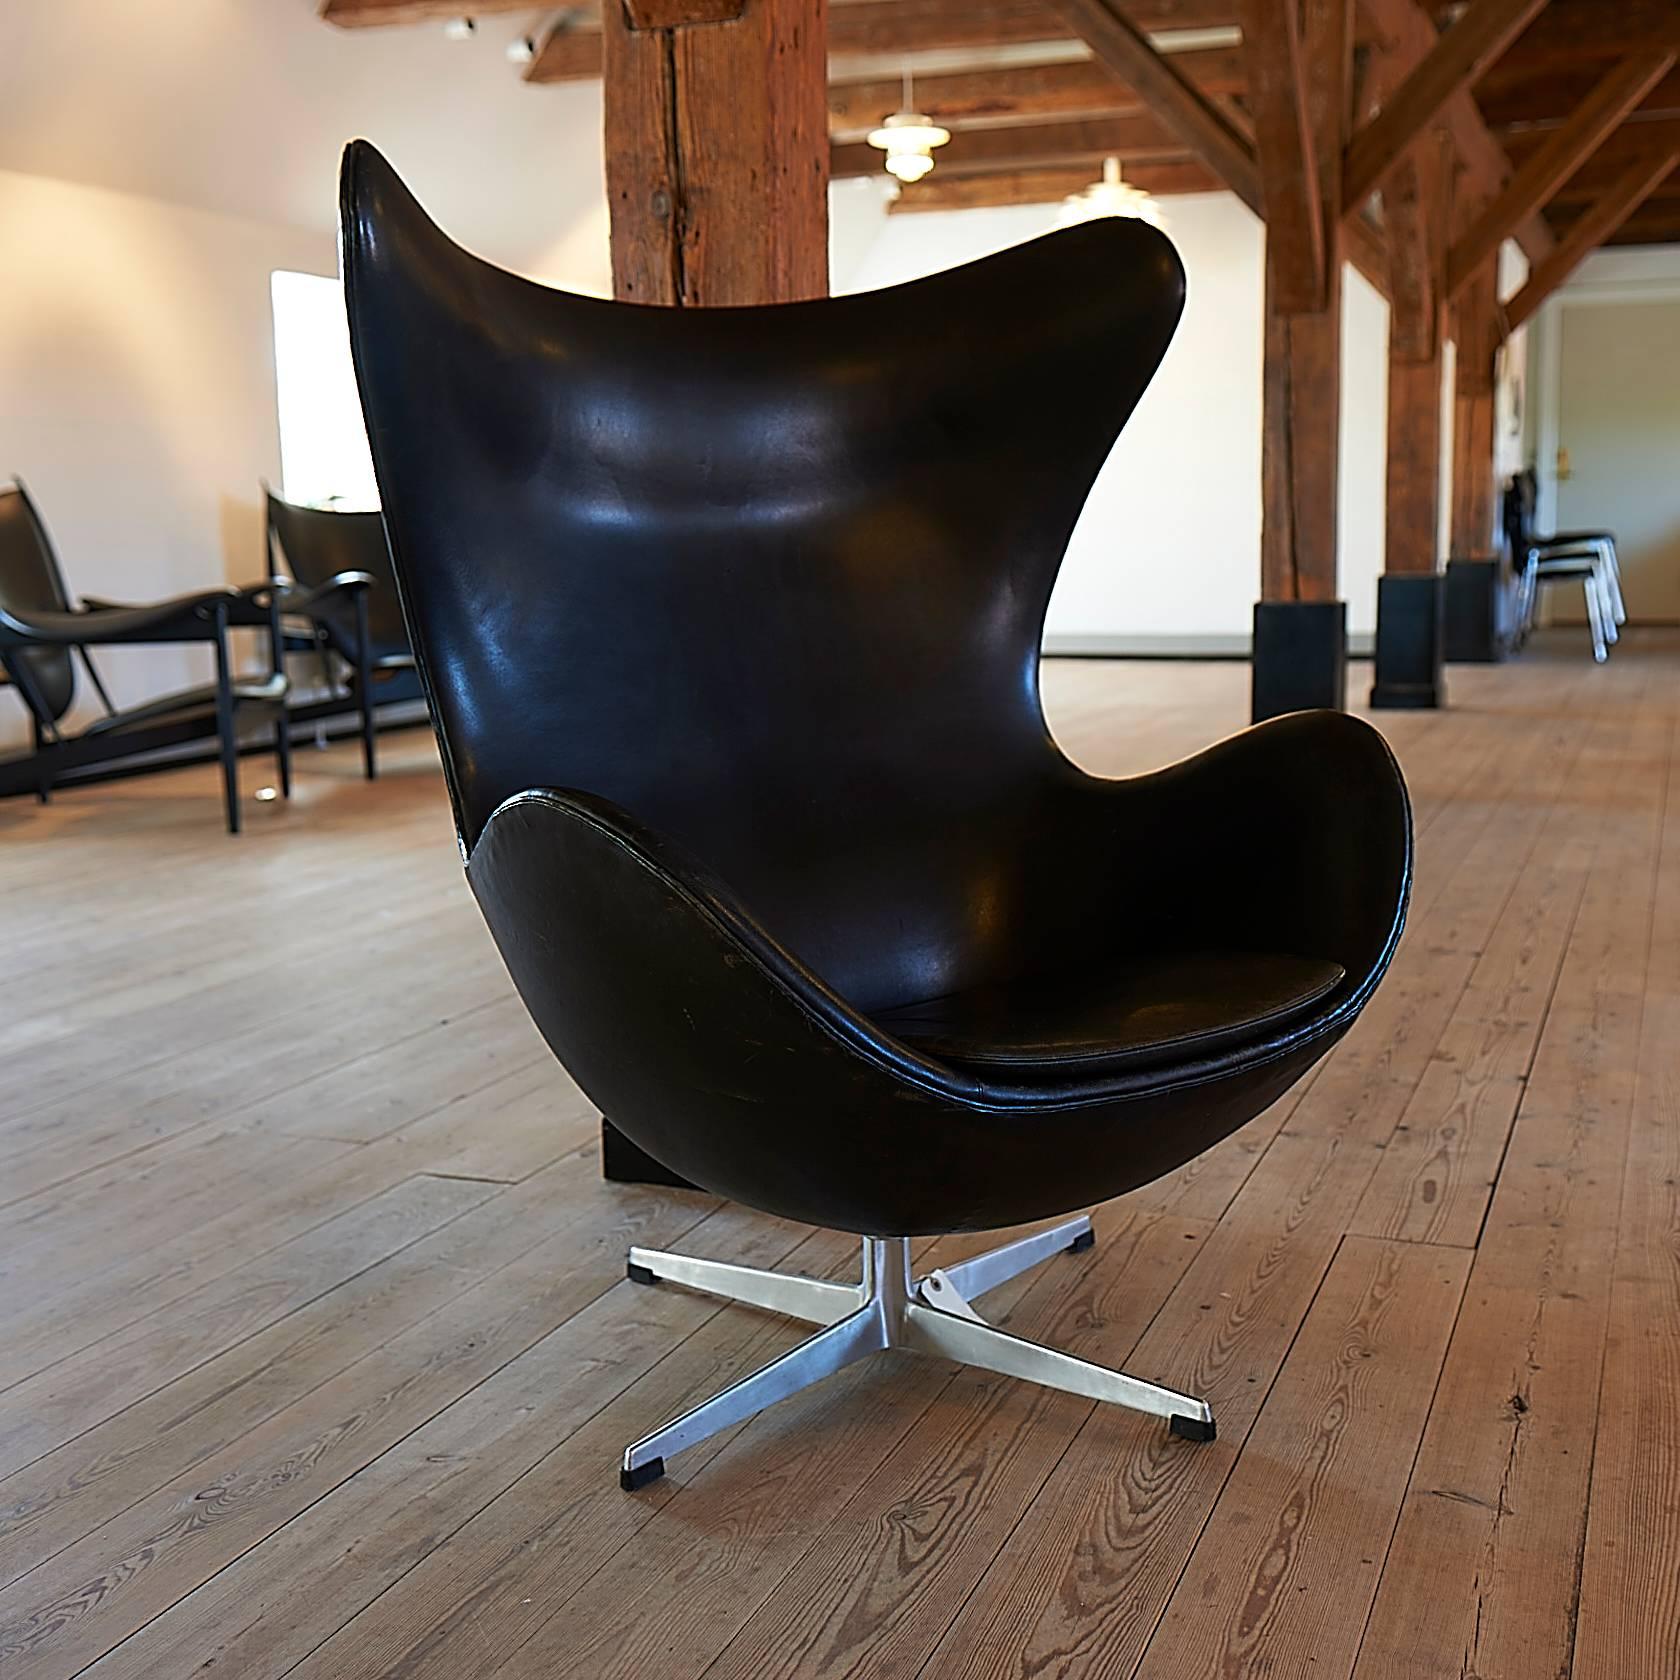 The Egg chair by Arne Jacobsen from the 1960s in the original black skin.
The chair has a very nice patina and there is no loose foam or skin.